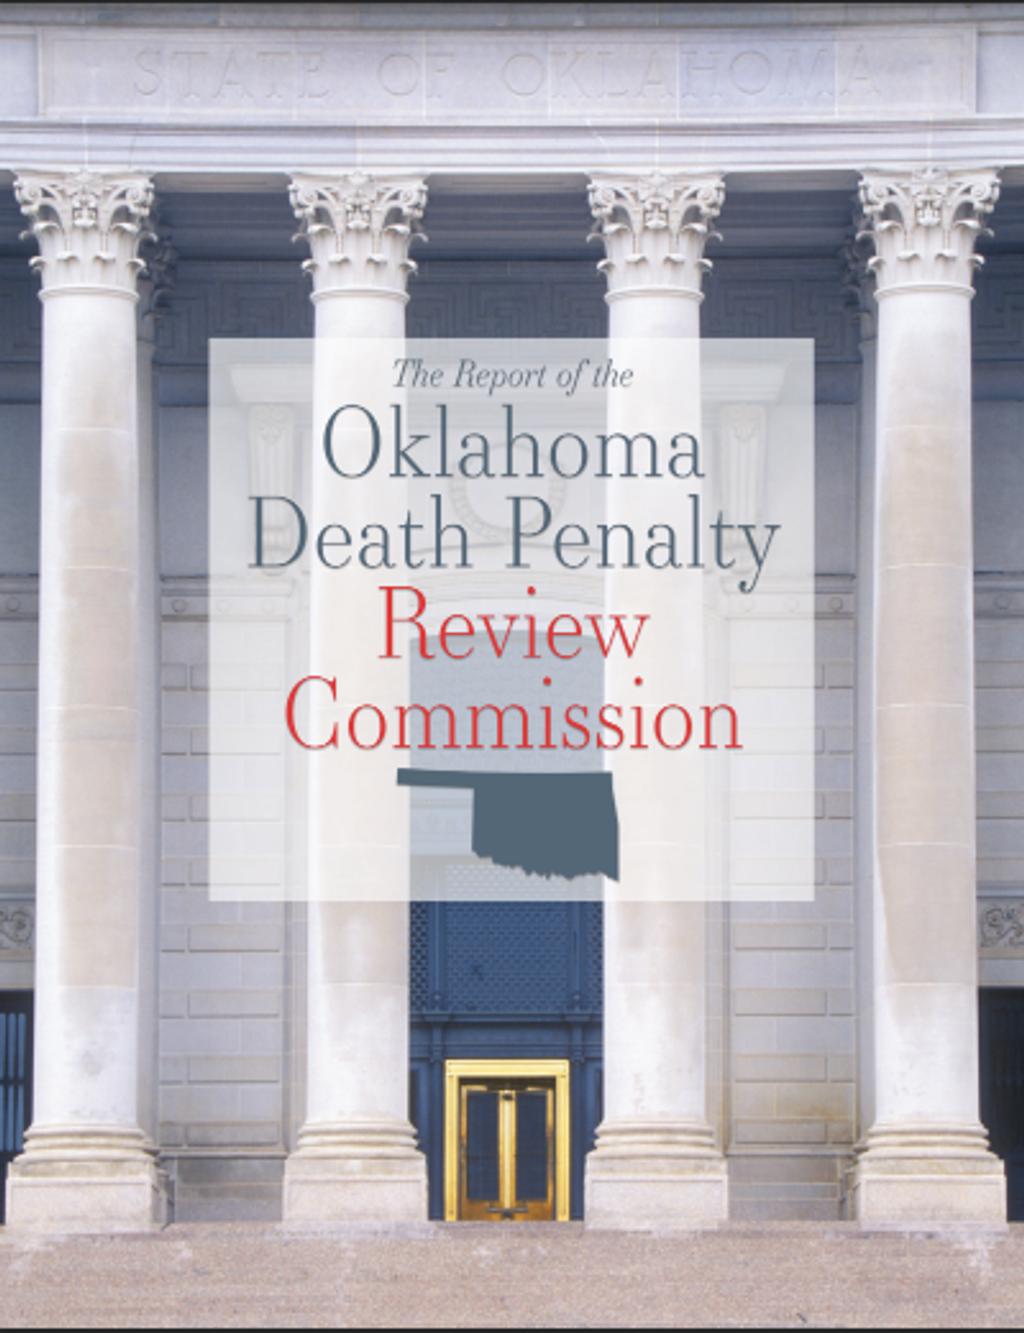 Bipartisan Oklahoma Report Recommends Moratorium on Executions Pending 'Significant Reforms'